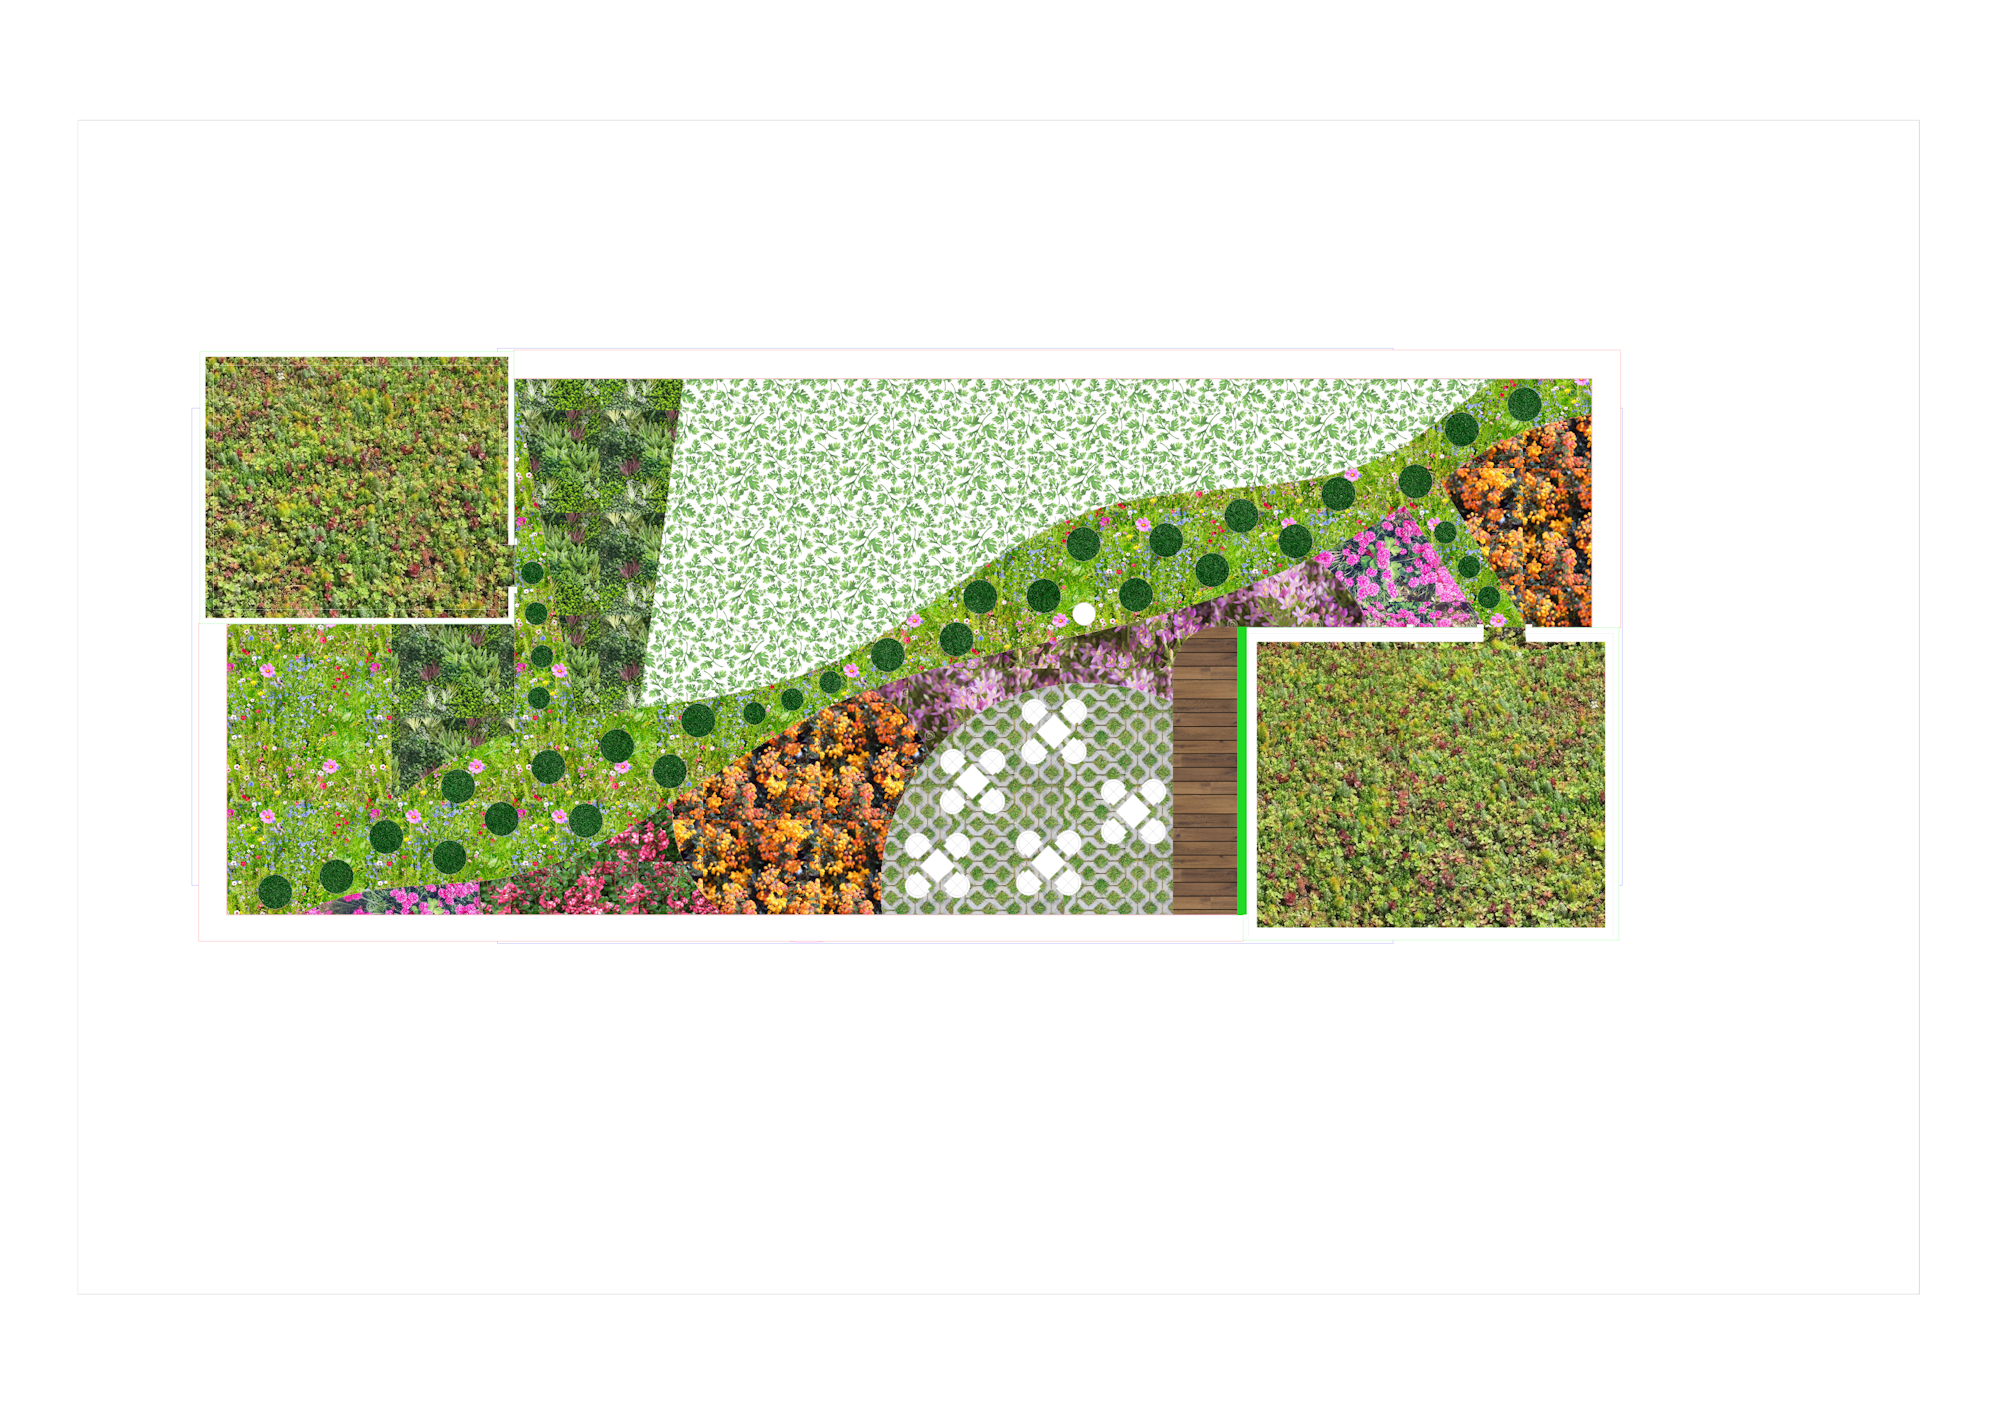 Plan view of designed green roof for staff well-being and biodiversity